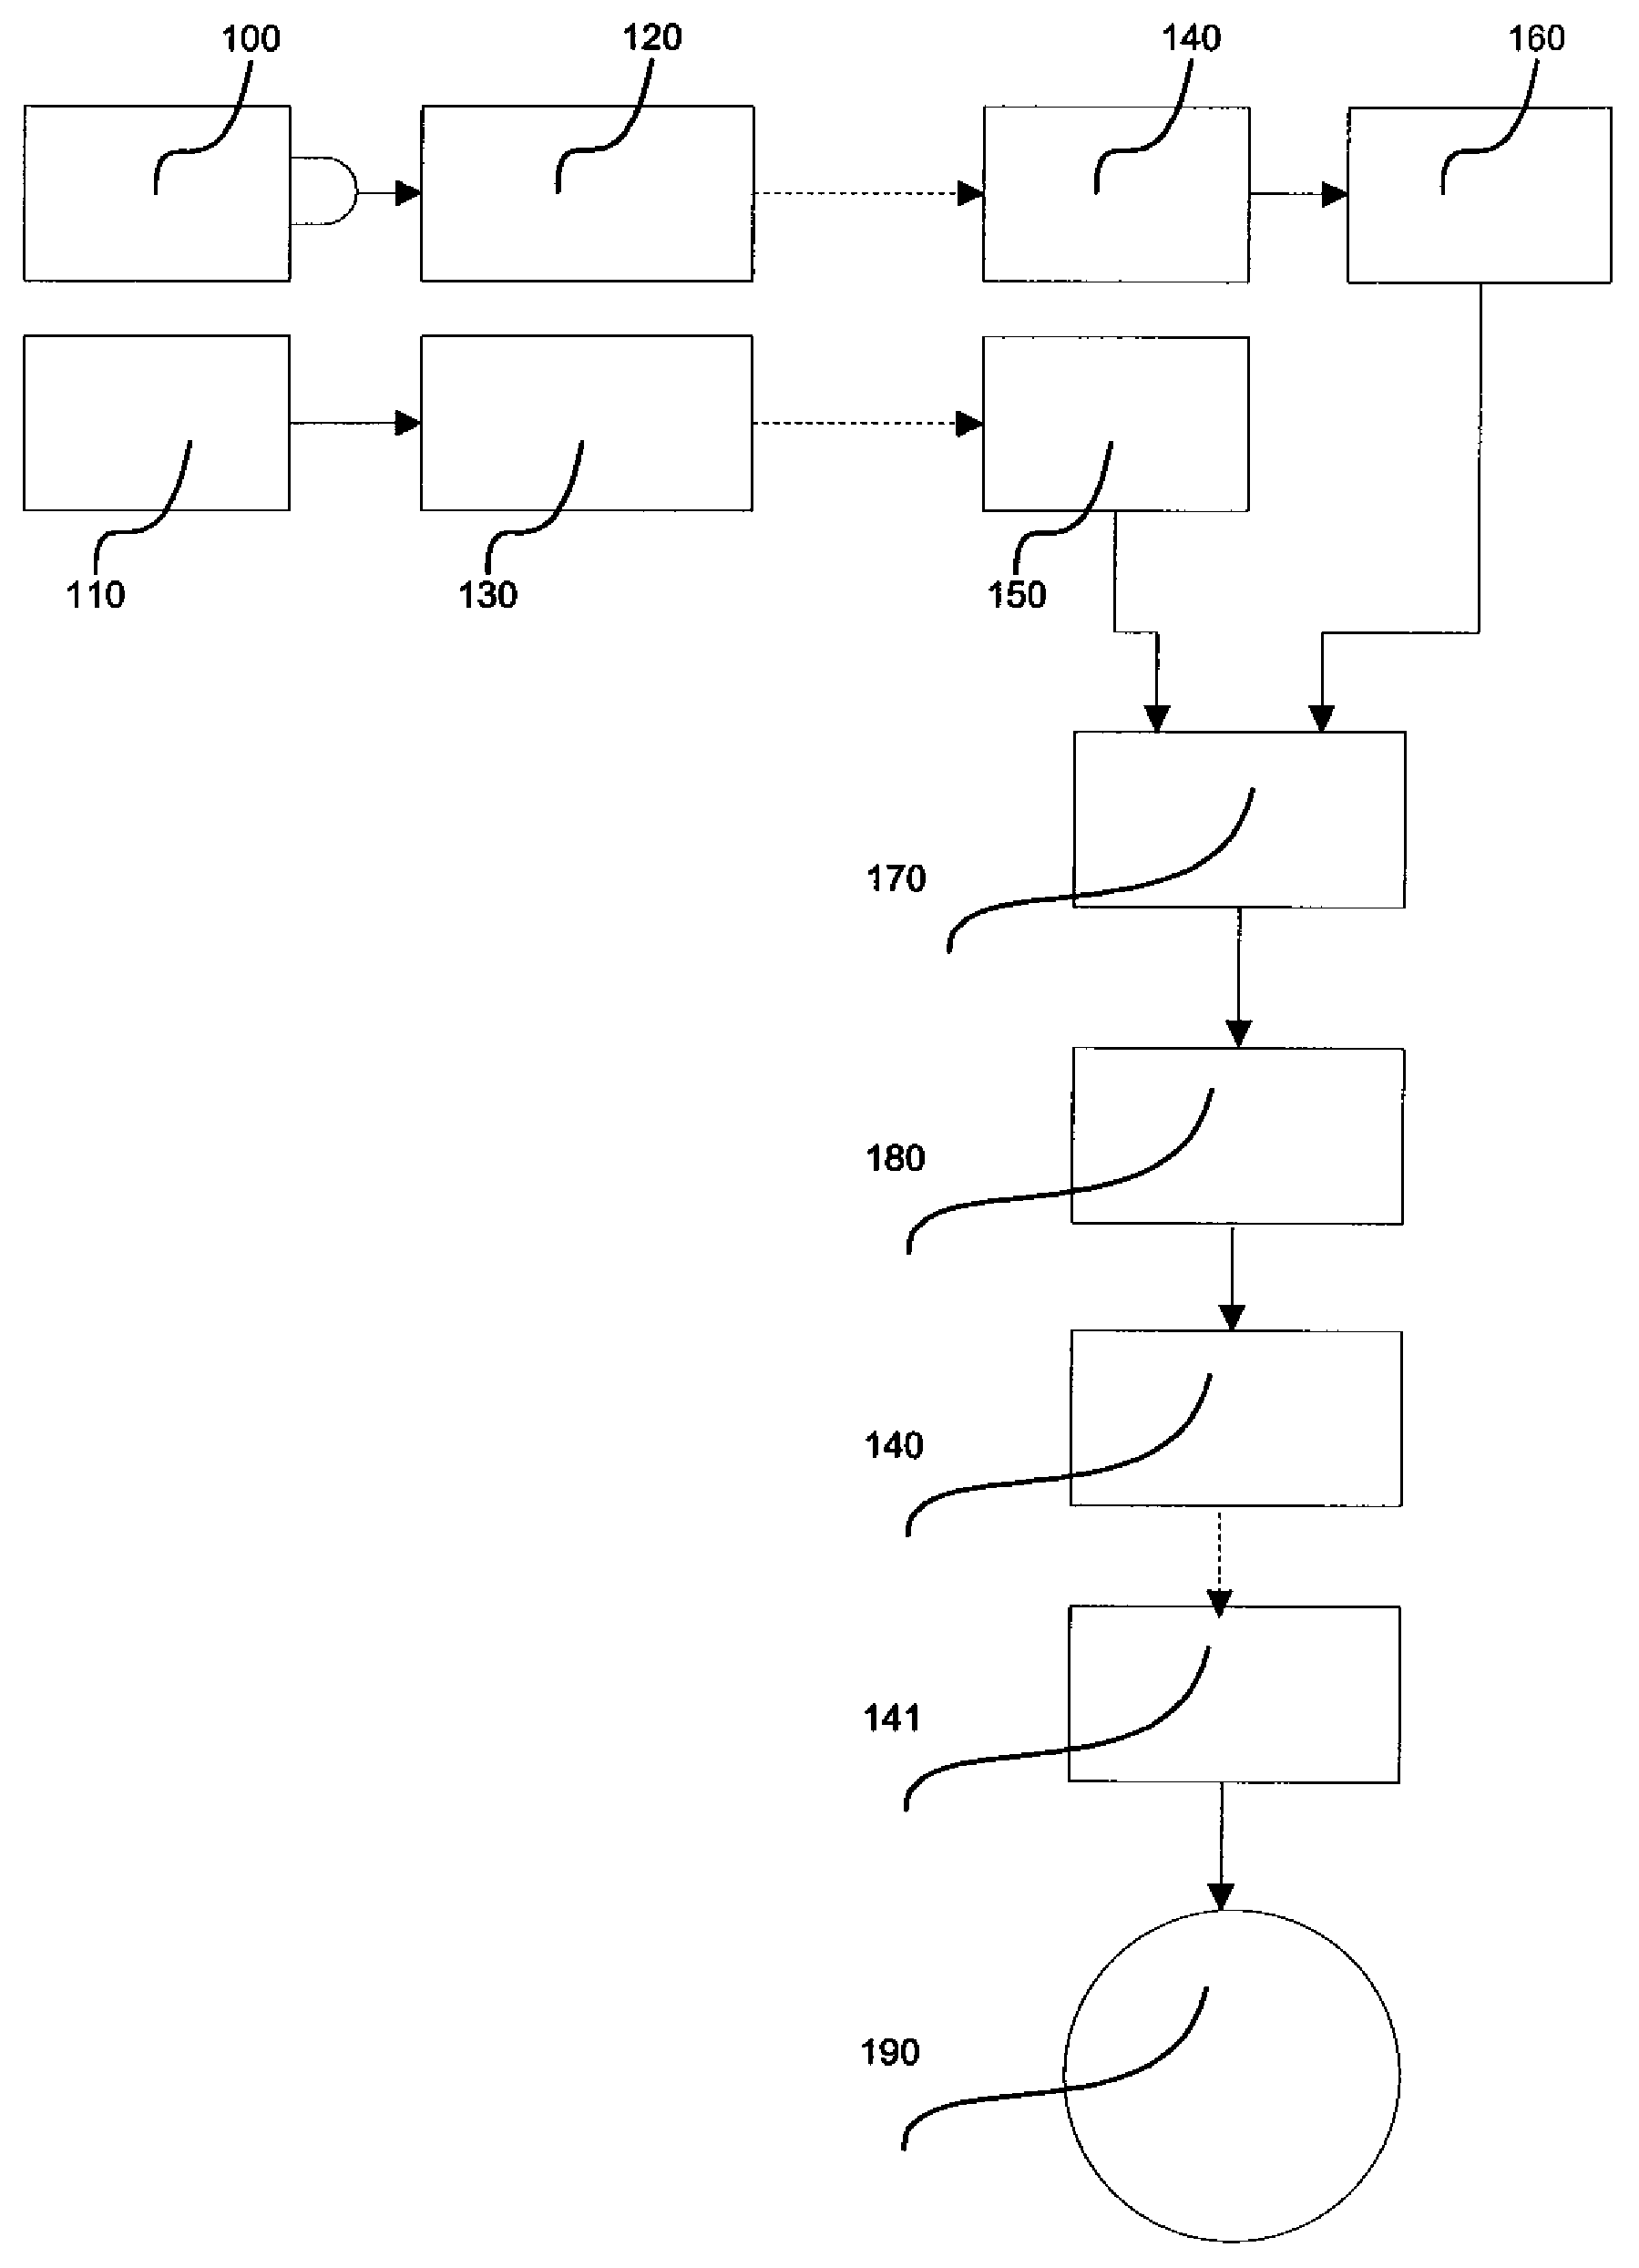 Method and apparatus for using thermal imaging and augmented reality